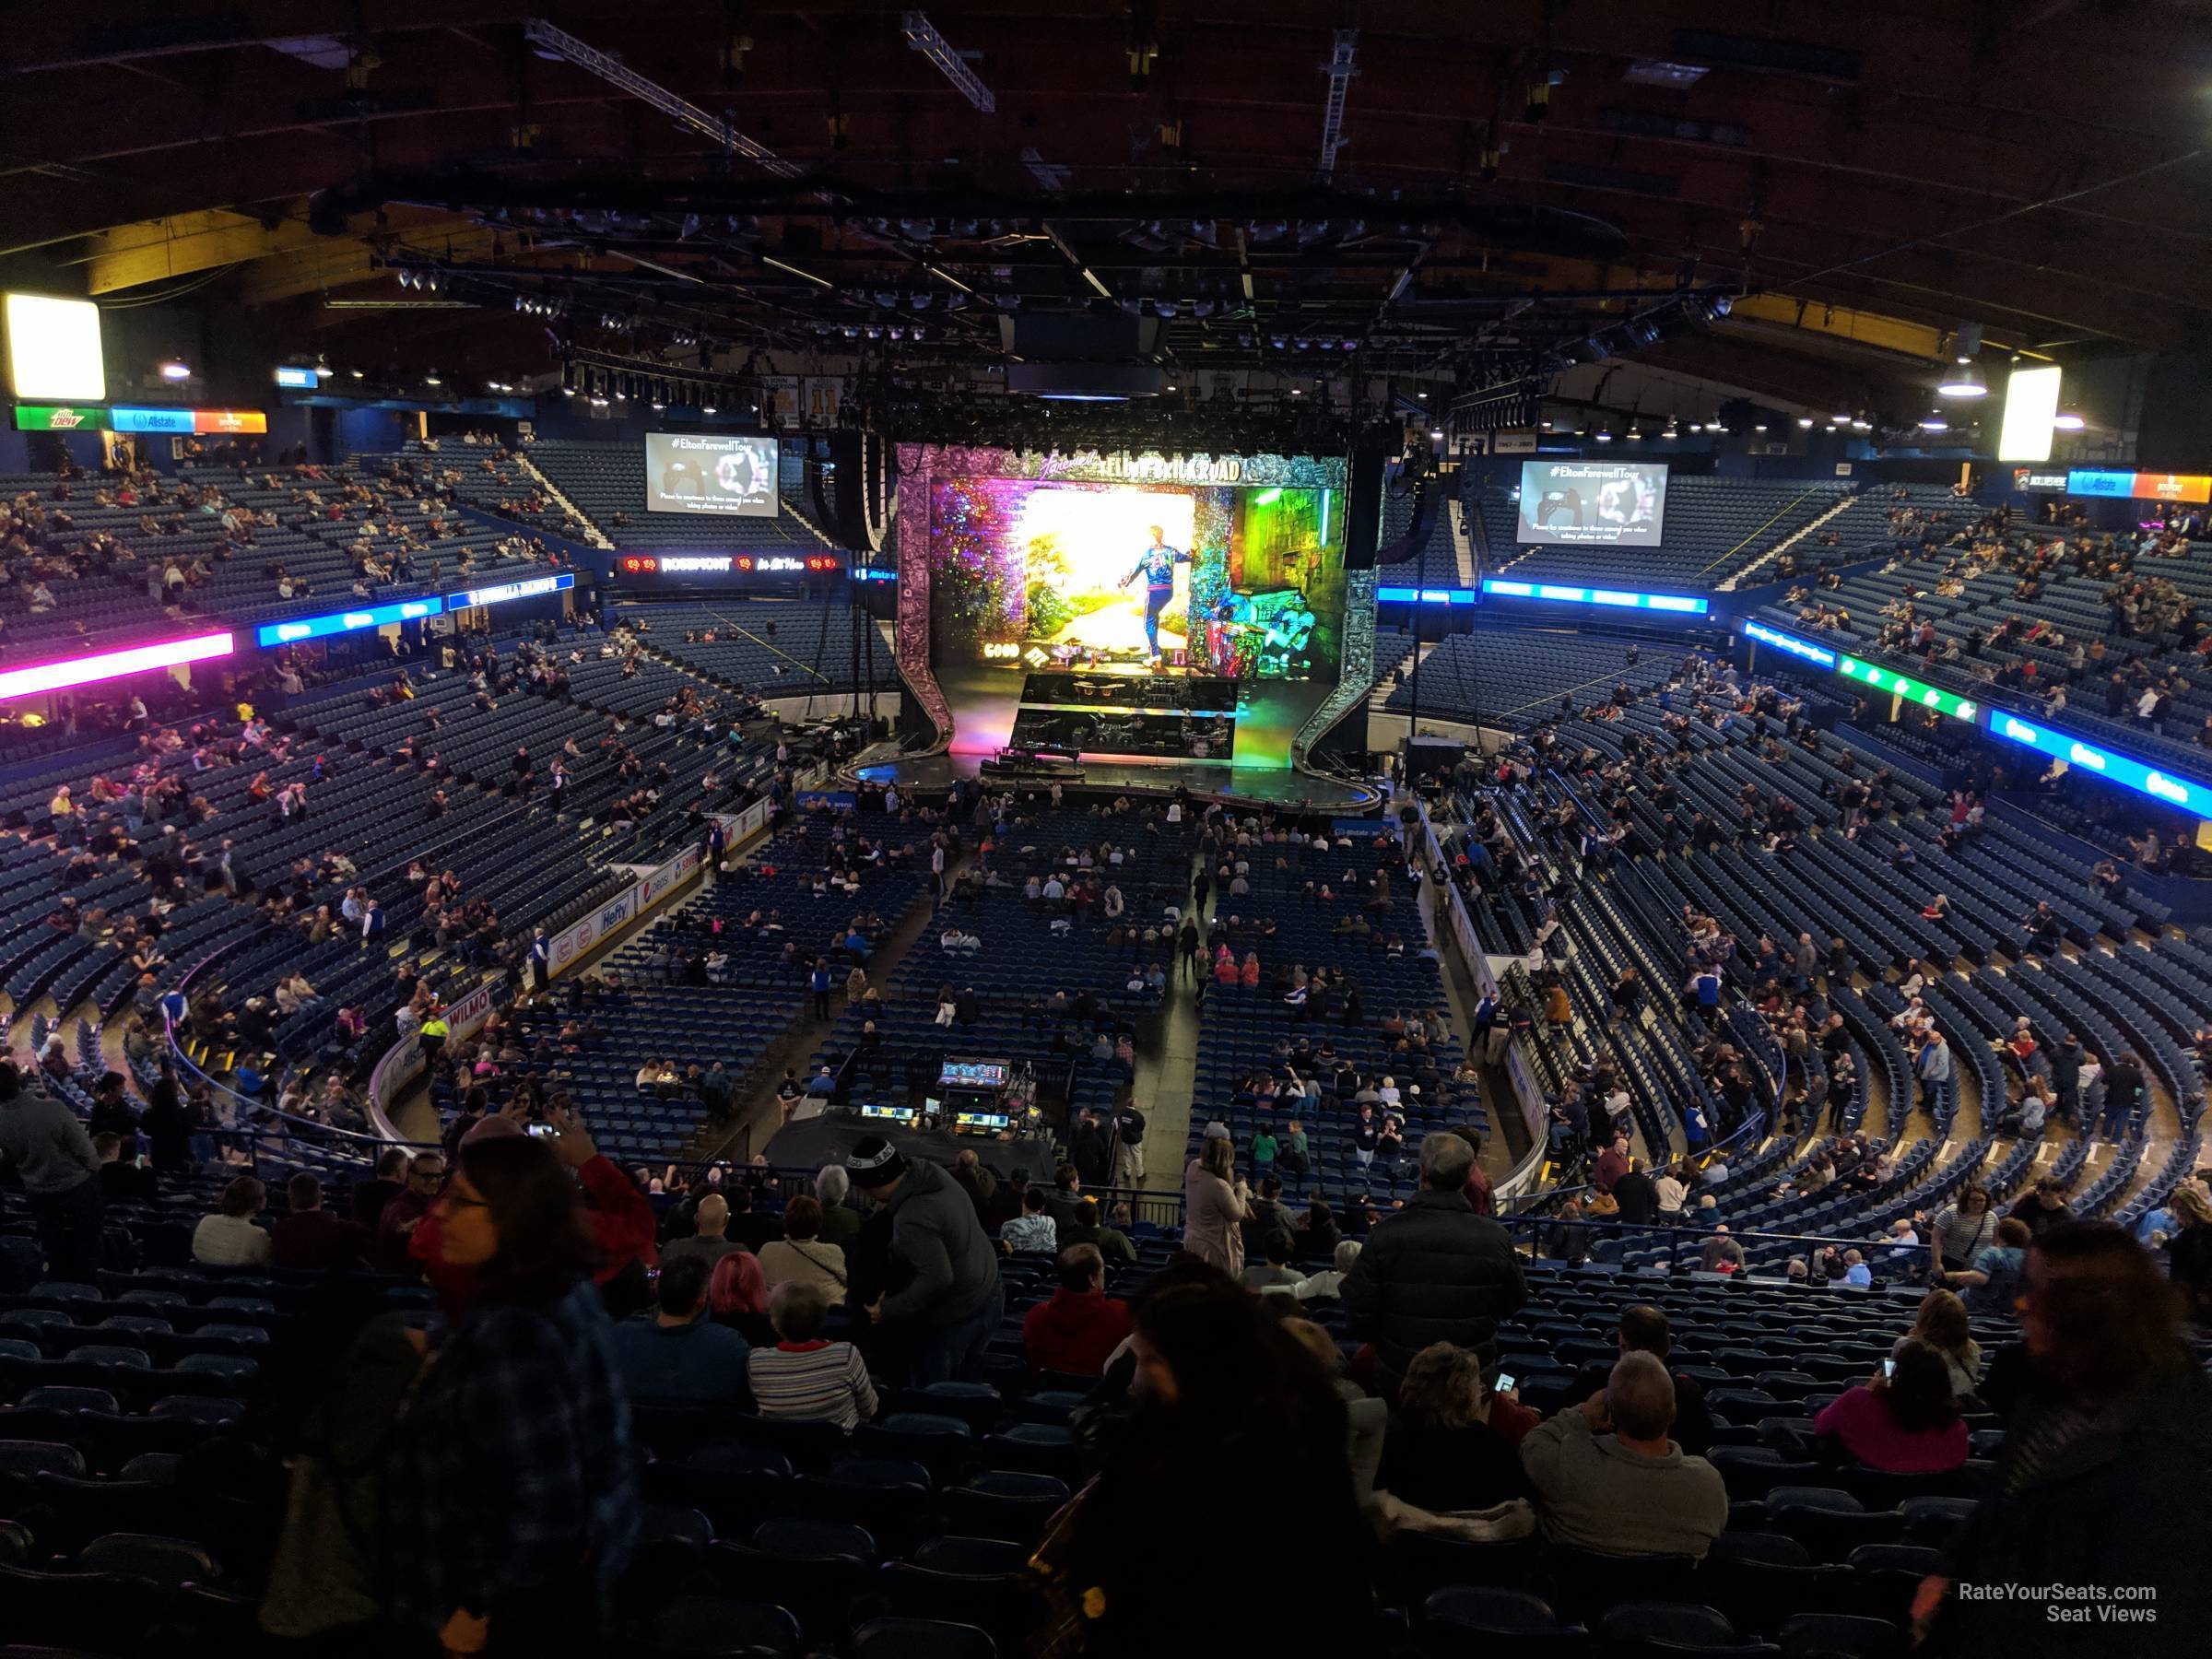 Section 214 at Allstate Arena